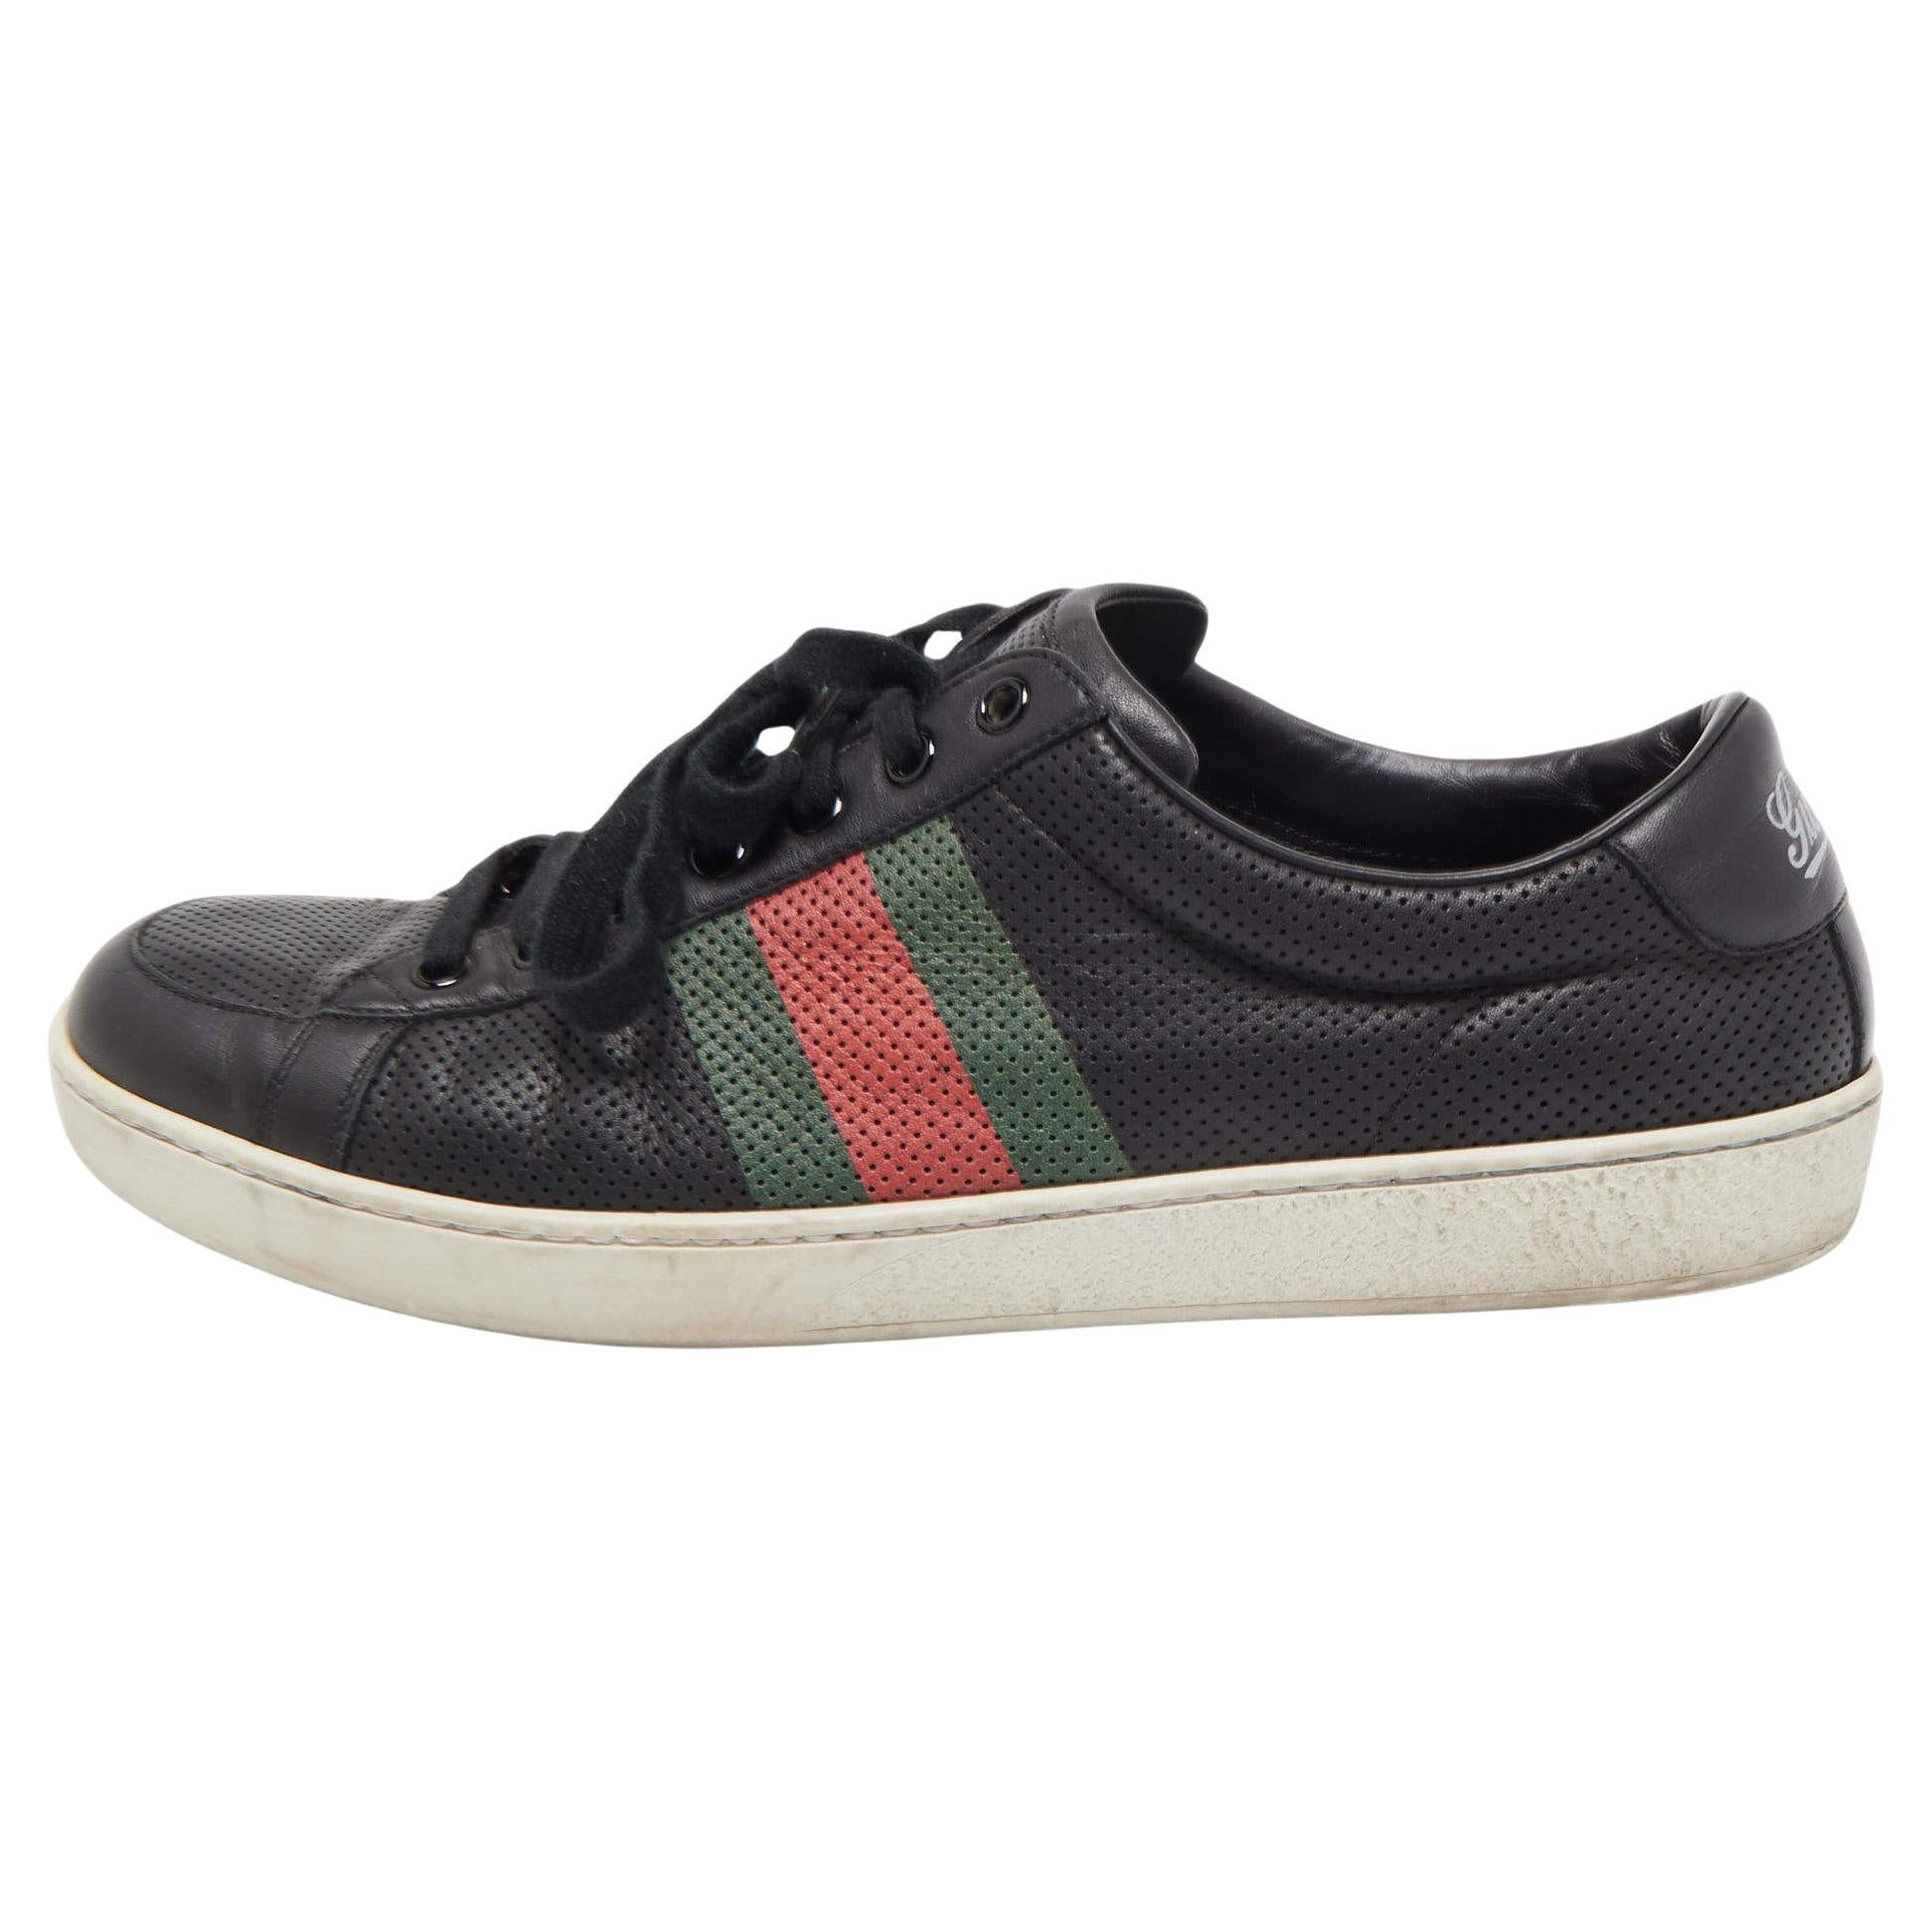 Gucci Black Perforated Leather Web Detail Low Top Sneakers Size 42.5 For Sale